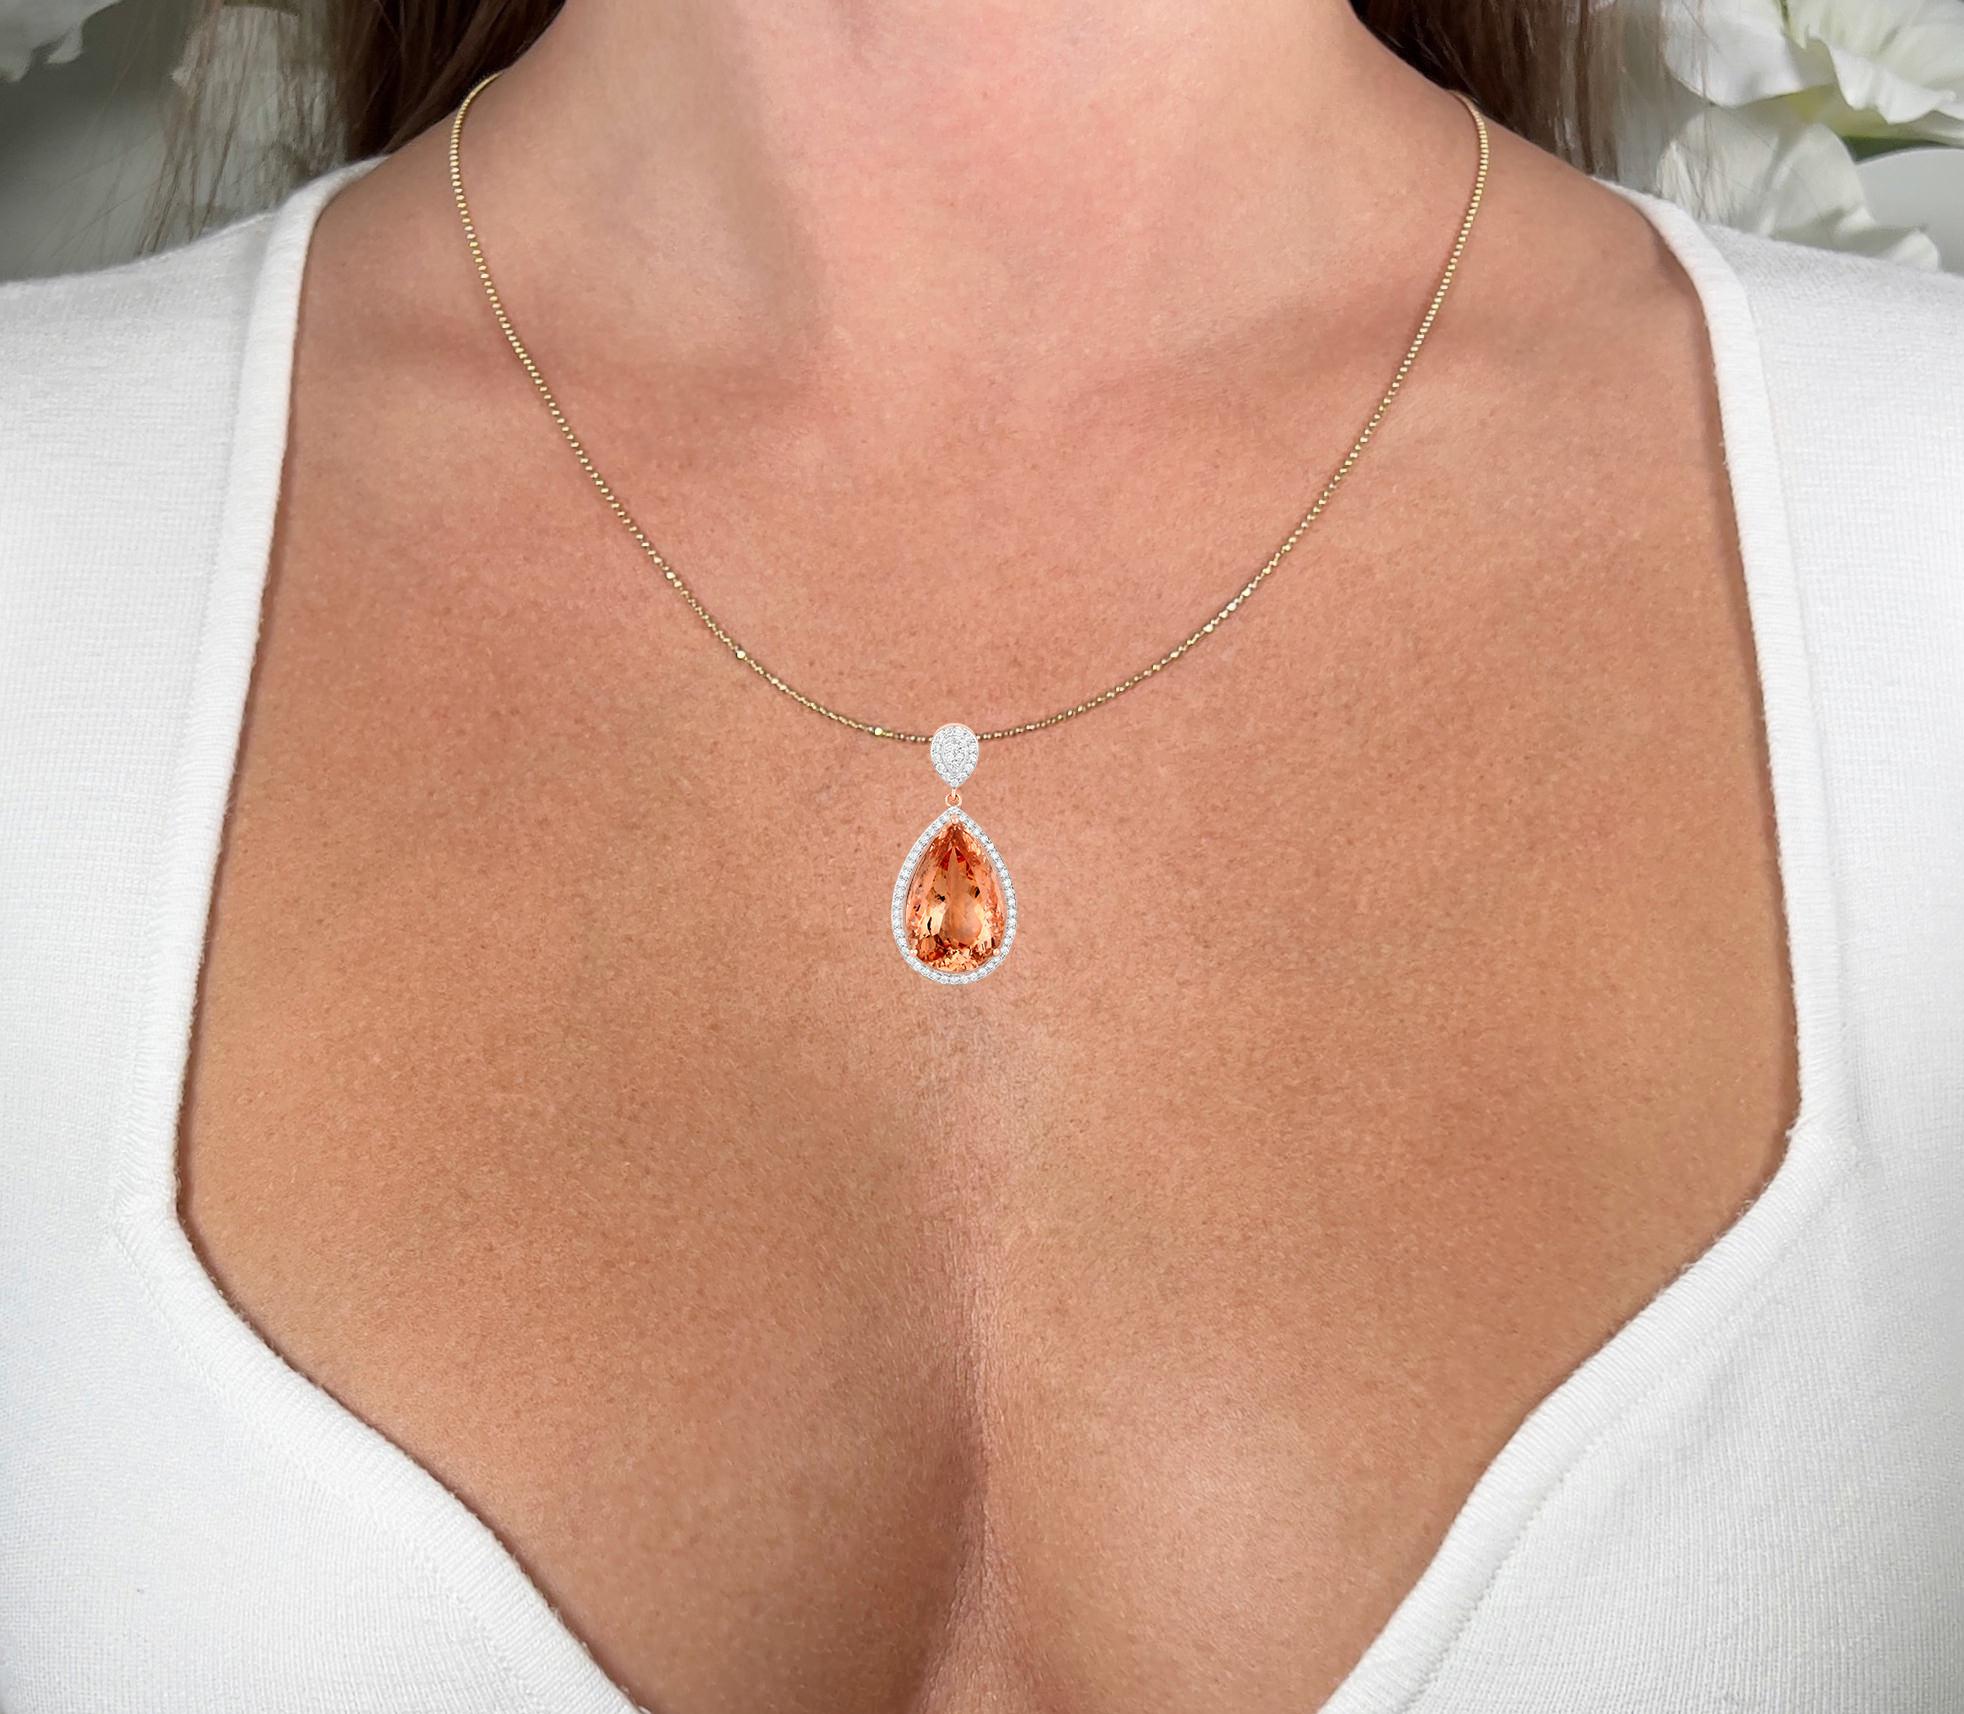 It comes with the Gemological Appraisal by GIA GG/AJP
All Gemstones are Natural
Pear Morganite = 12.77 Carat
62 Round Diamonds = 0.50 Carats
Metal: 14K Rose Gold
Pendant Dimensions: 35 x 17 mm
